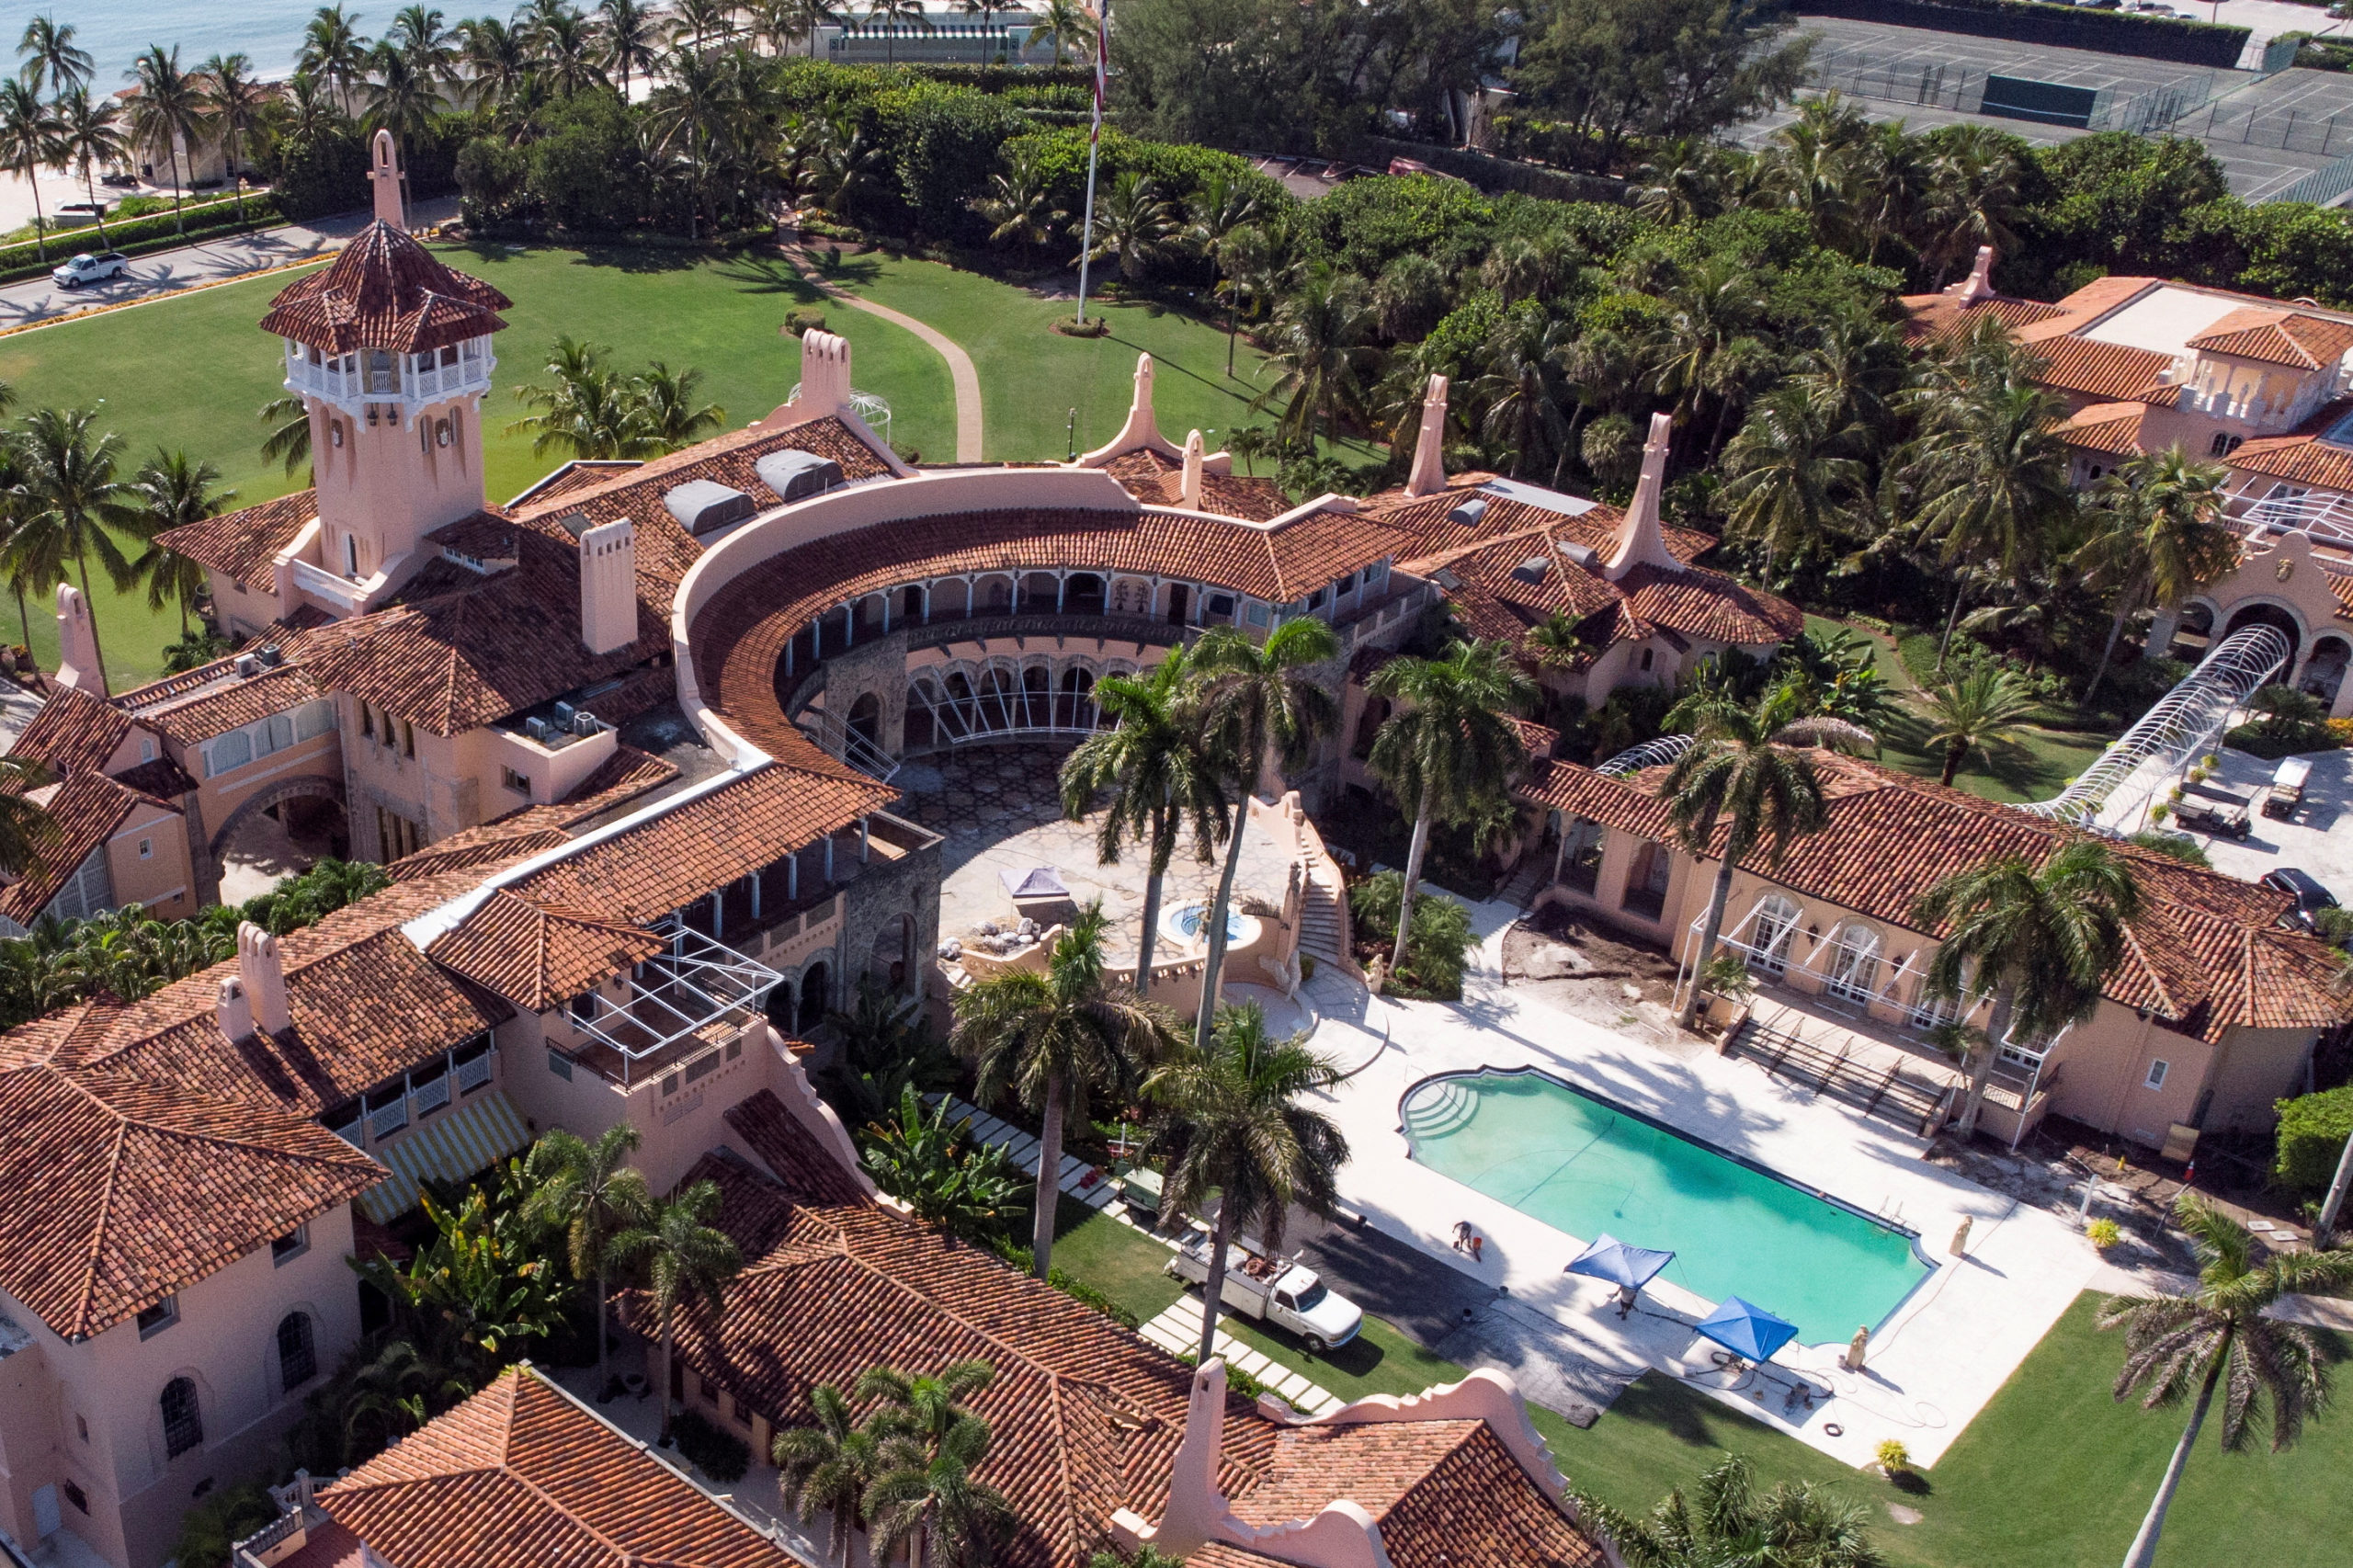 An aerial view of former U.S. President Donald Trump's Mar-a-Lago home after Trump said that FBI agents searched it, in Palm Beach, Florida, U.S. August 15, 2022. REUTERS/Marco Bello